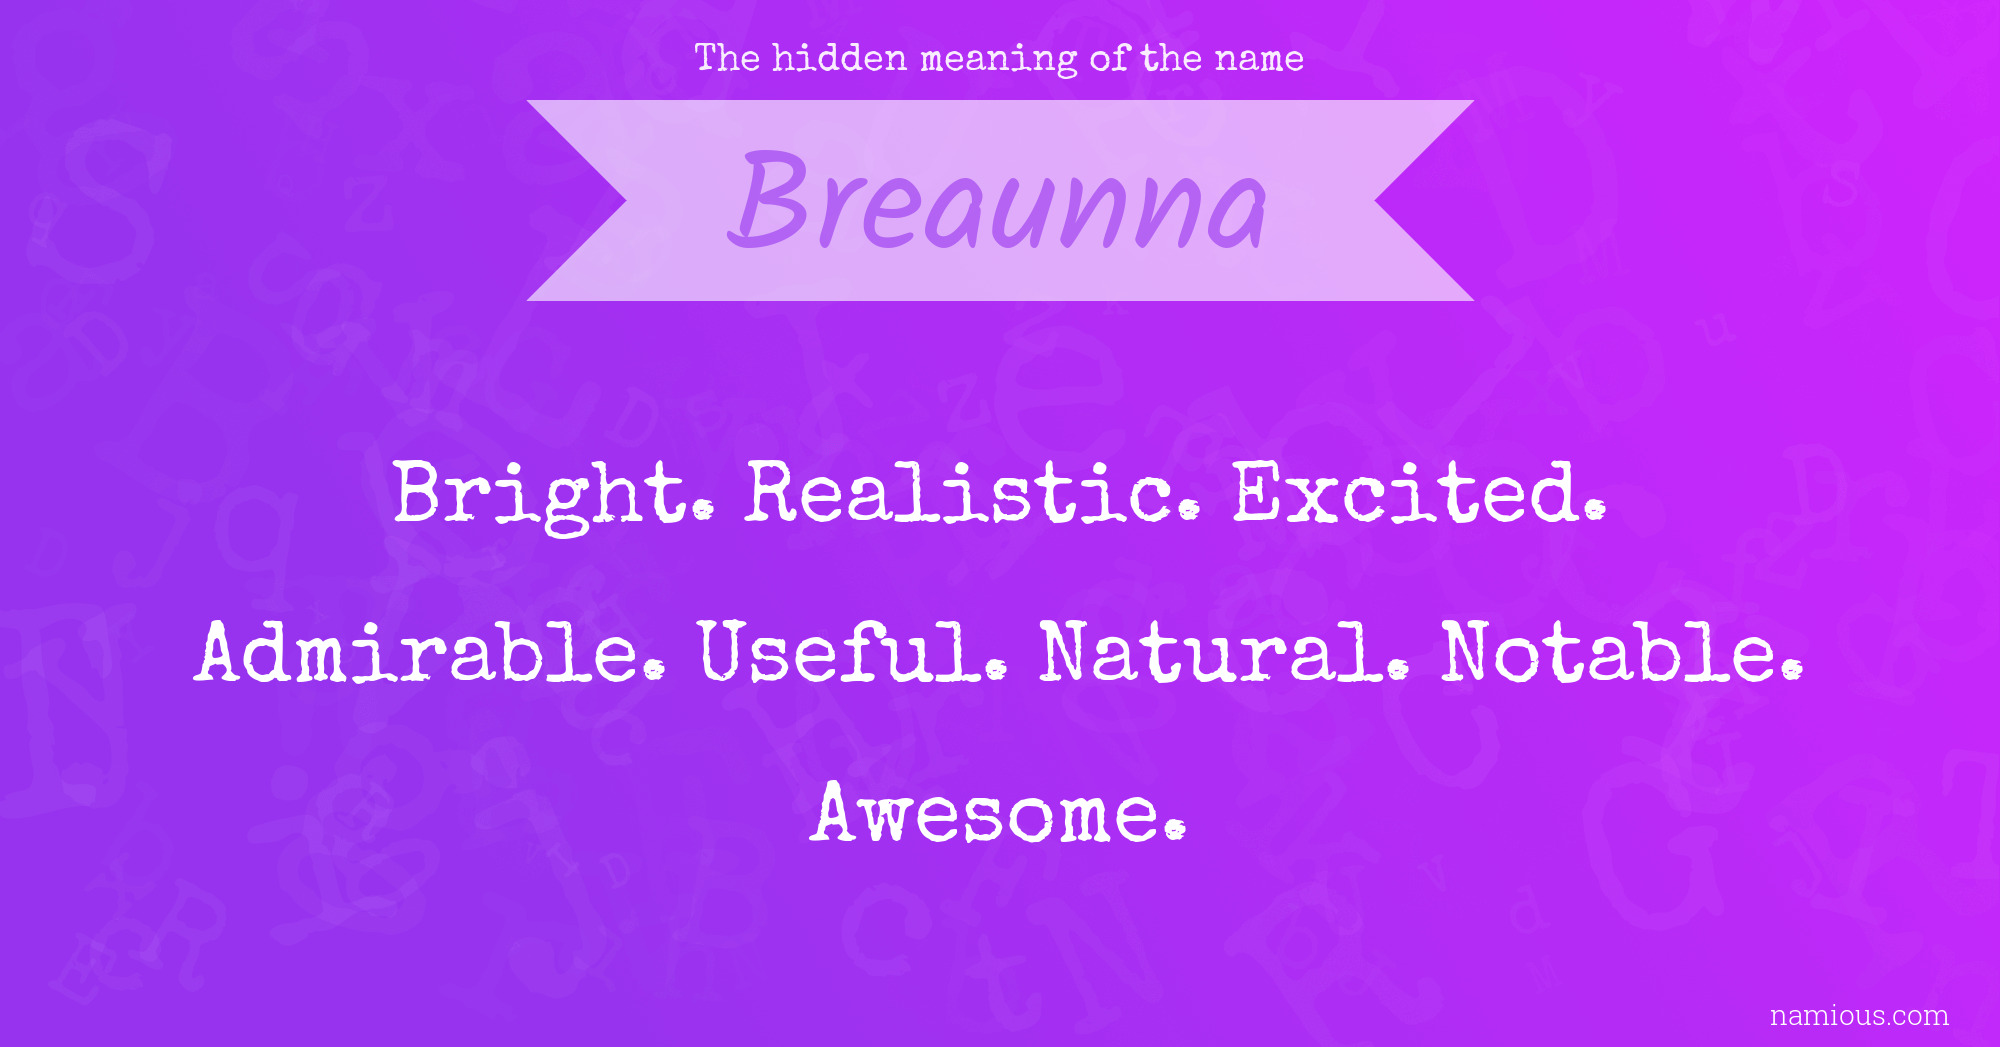 The hidden meaning of the name Breaunna